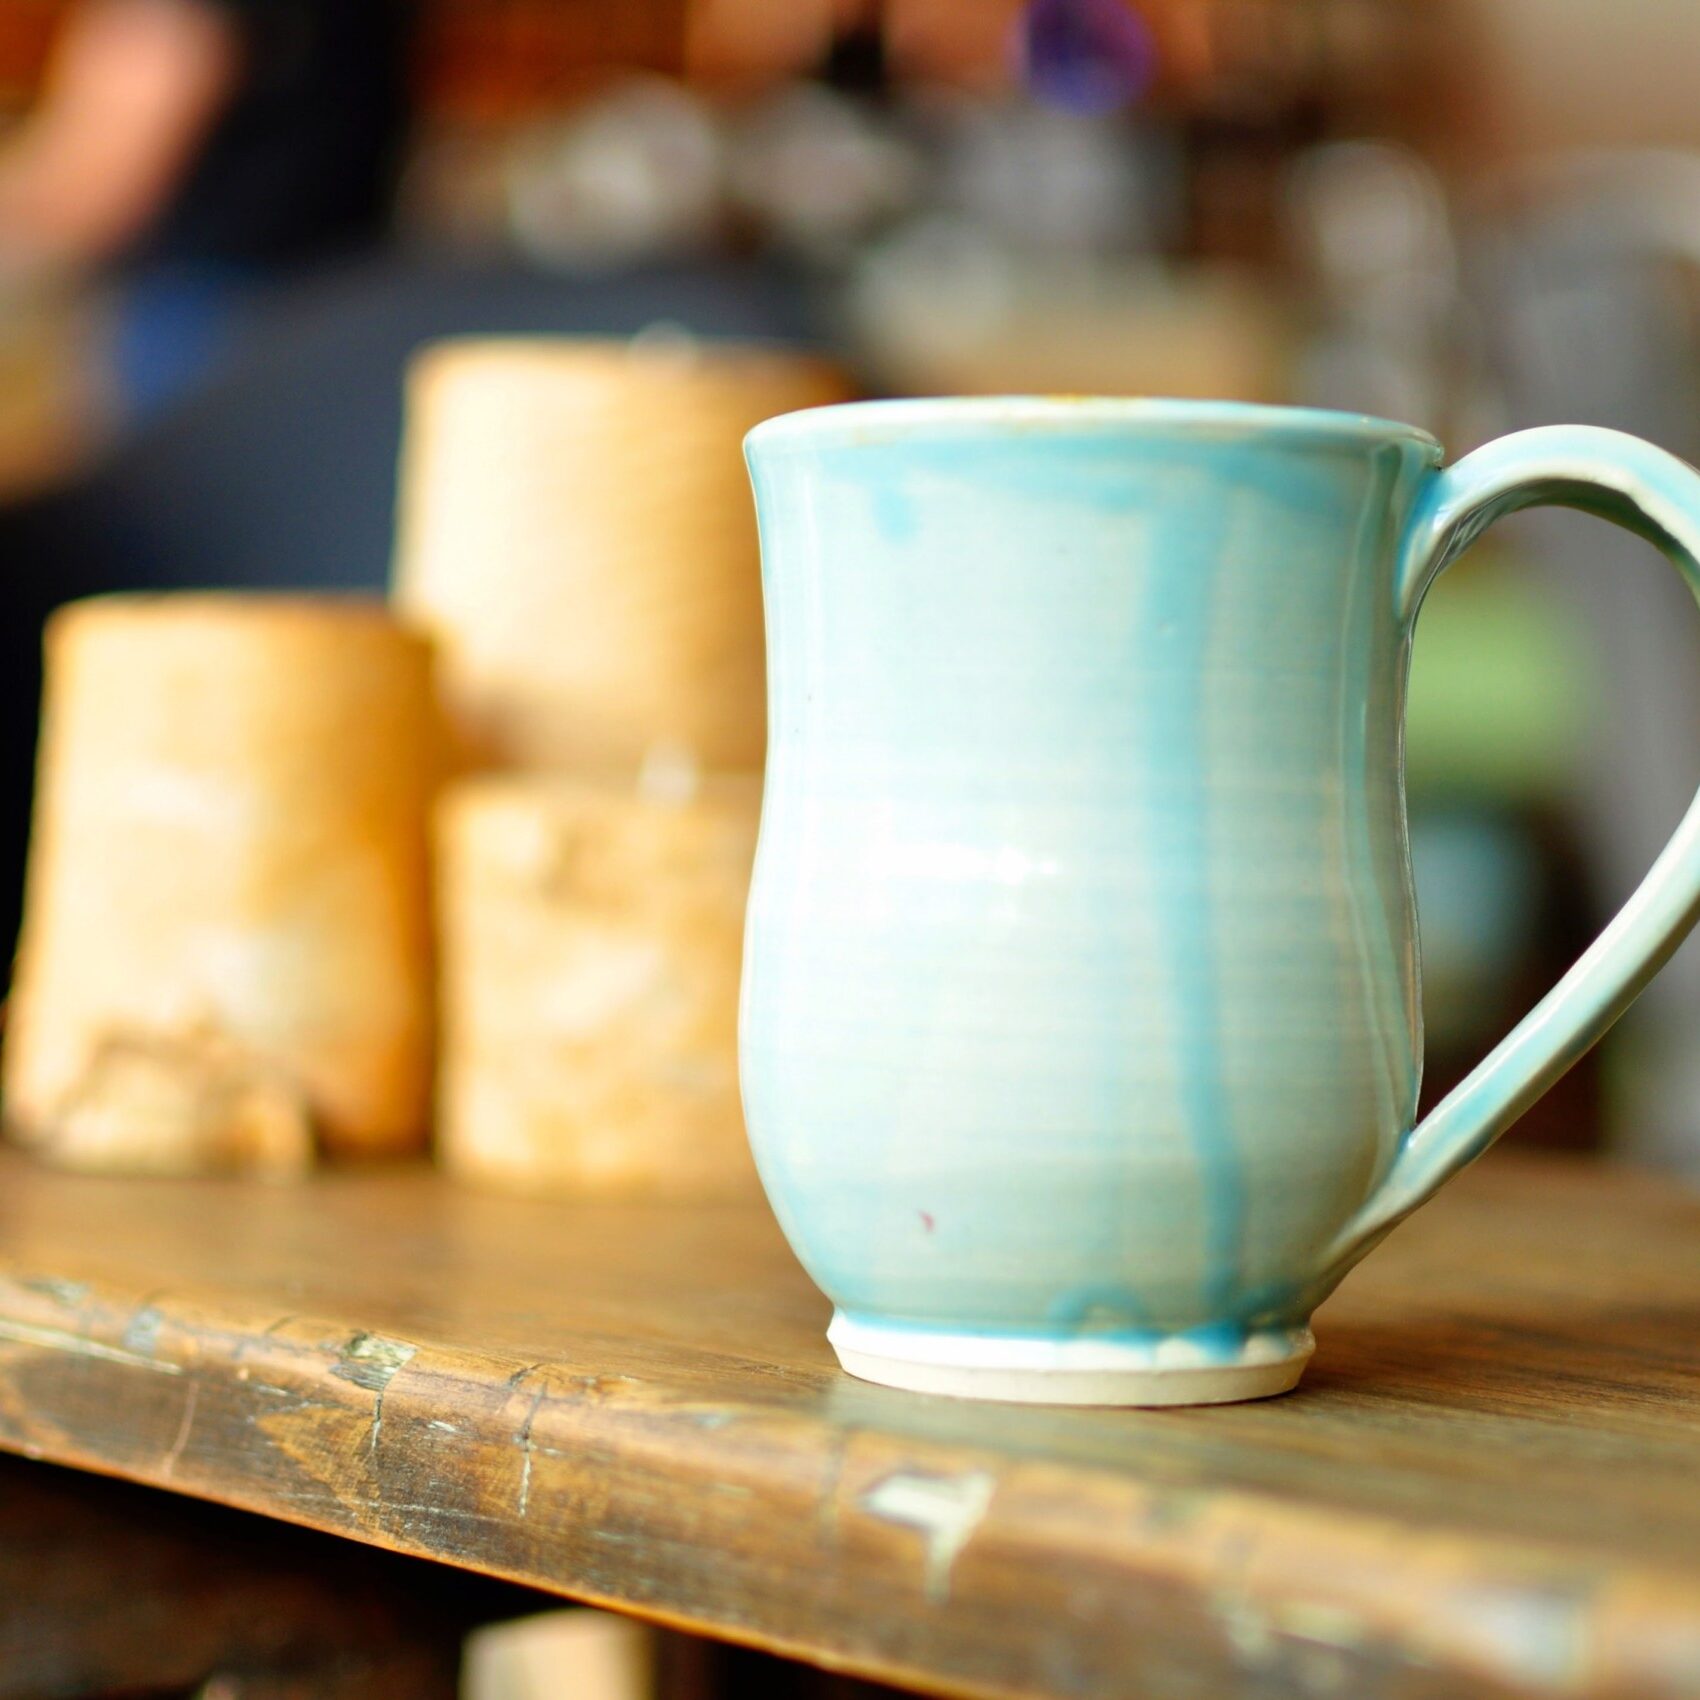 The Pottes Market Coffee Cup thanks Christy Moyer Unsplash